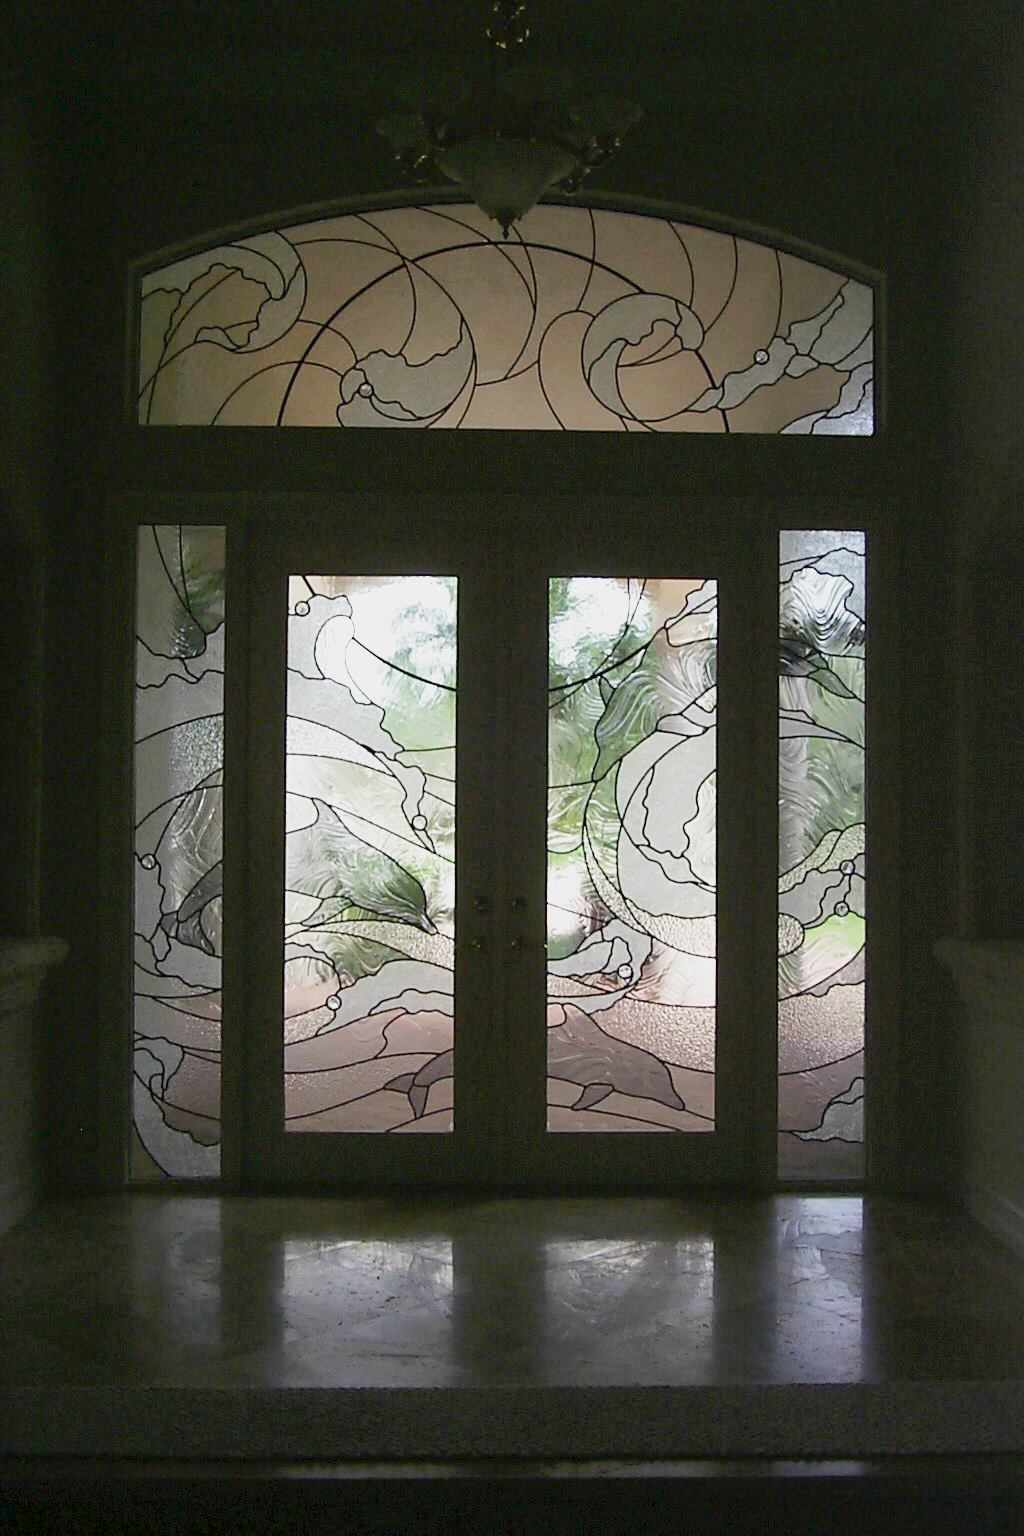 Modern an contemporary style entryway of ocean waves and dolphins with clear and clear textured glass.